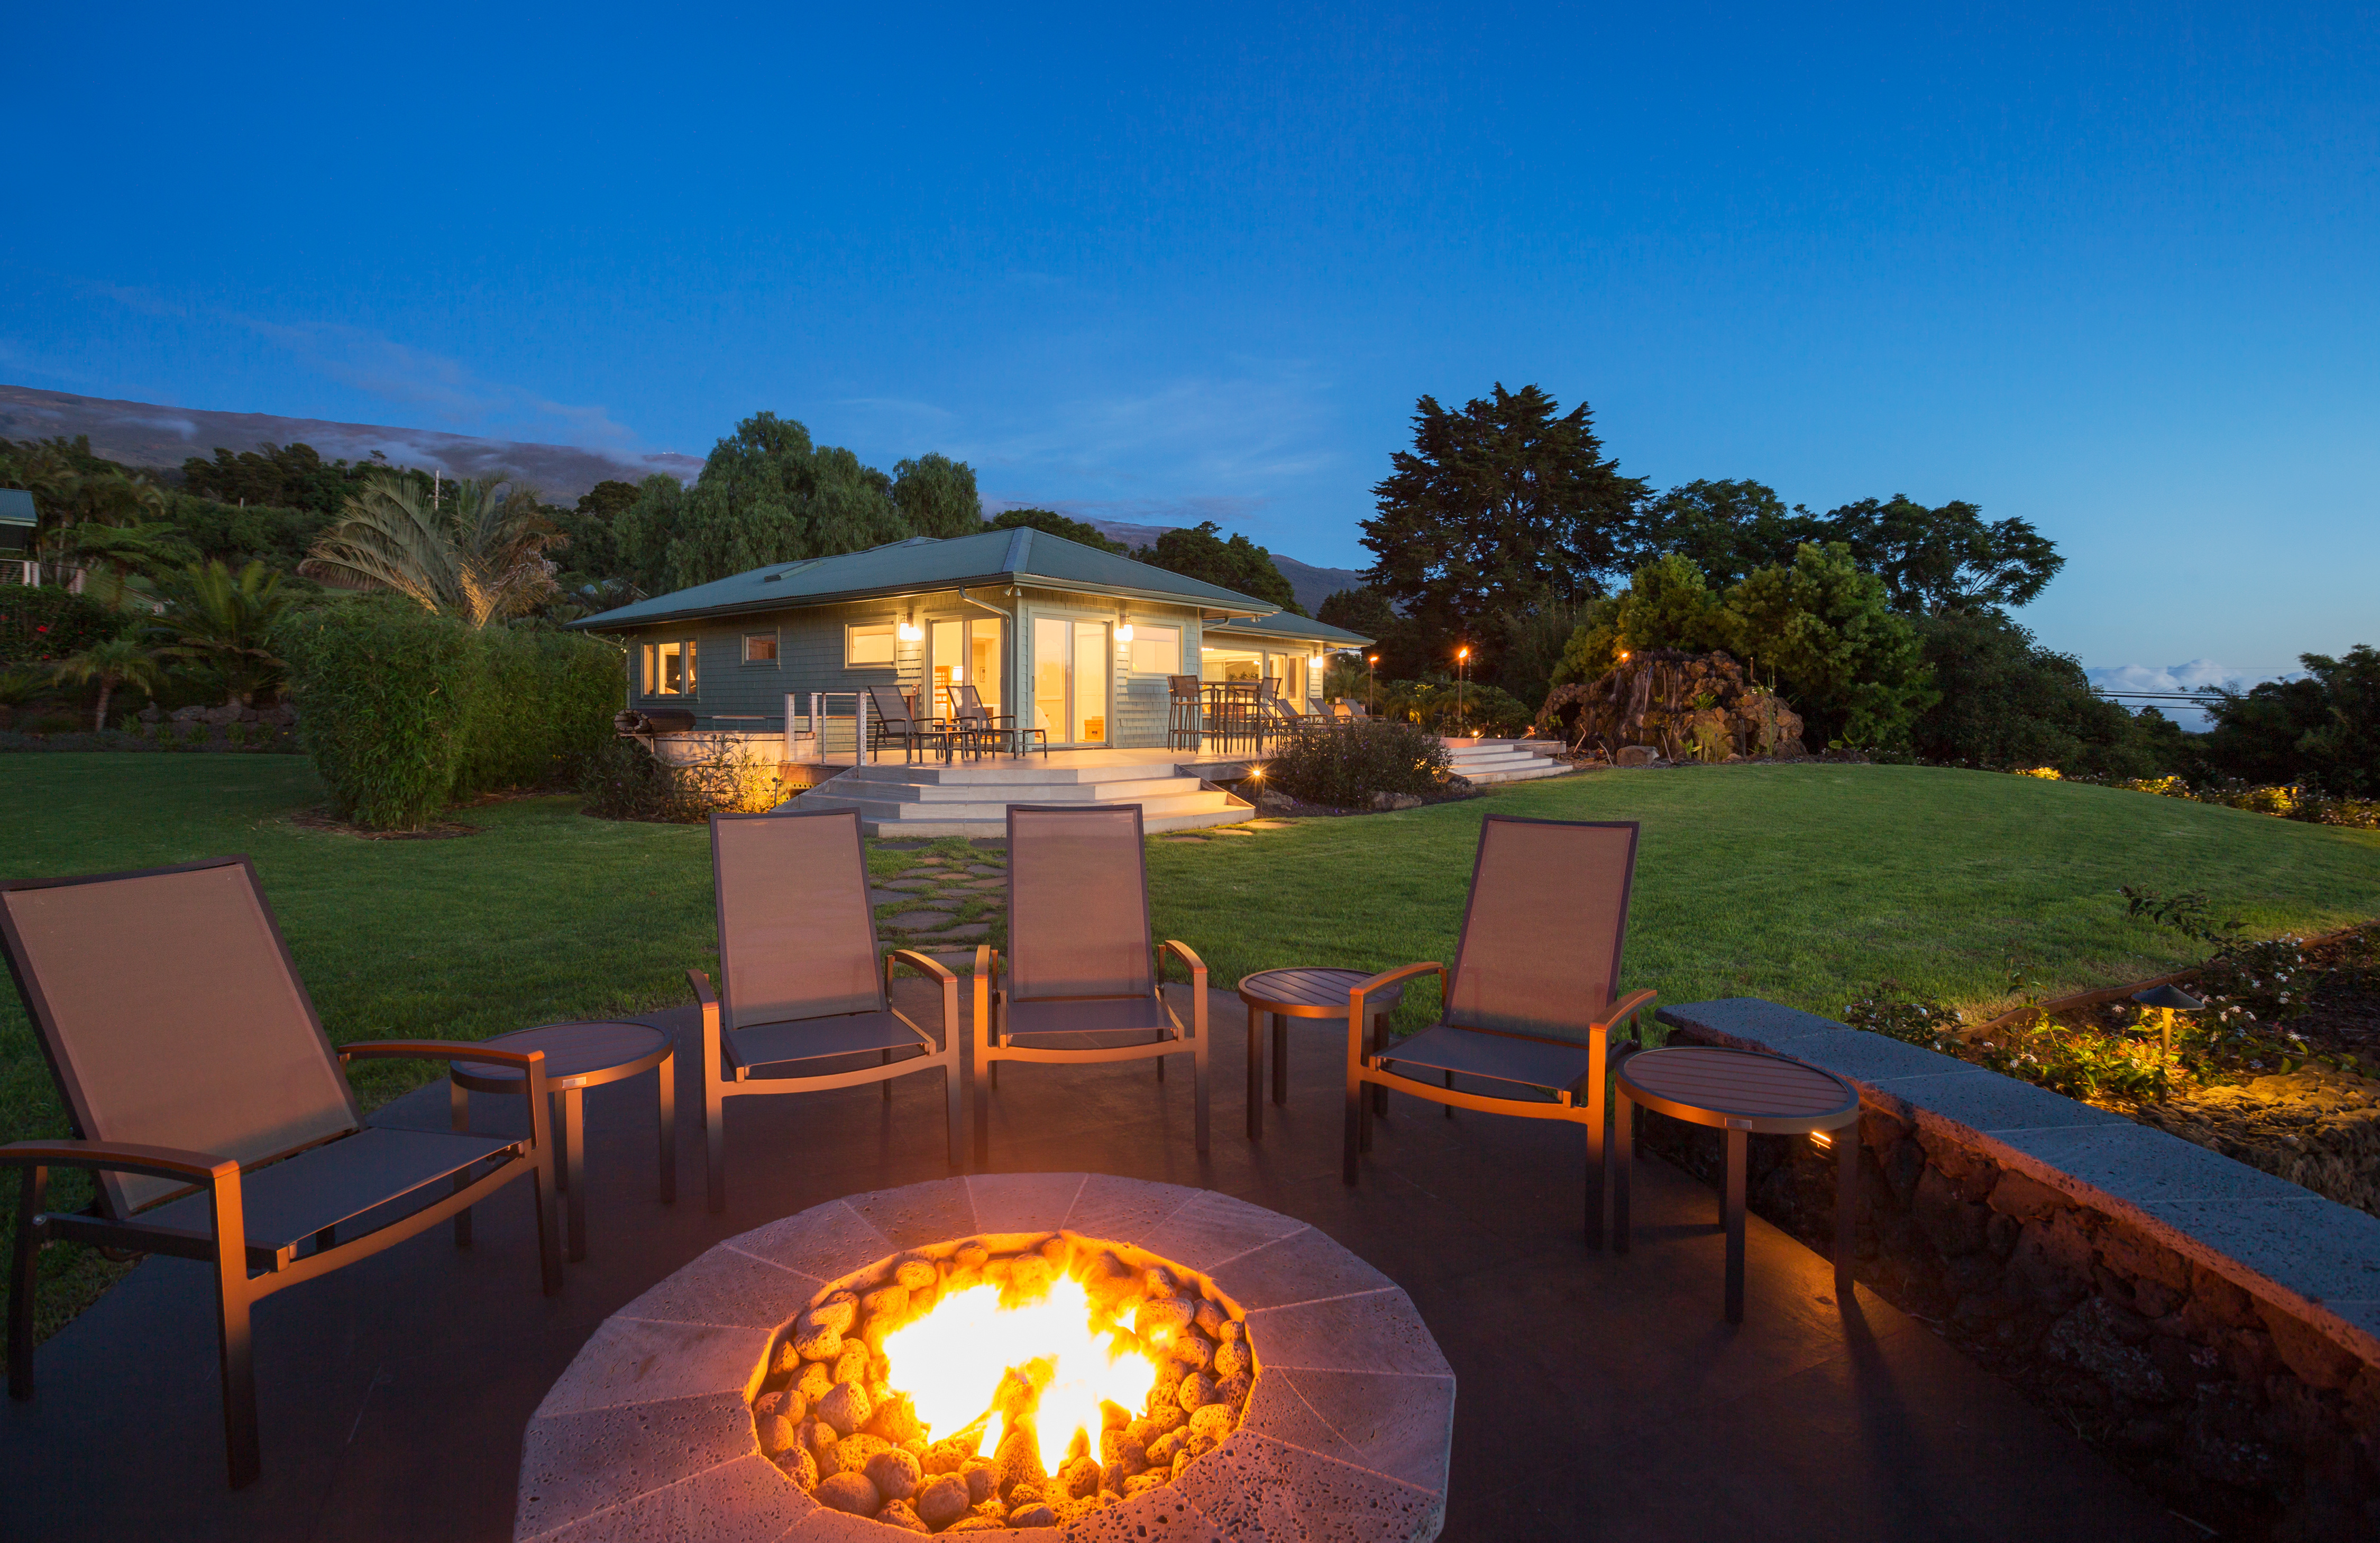 Top Three Reasons to Enhance Your Backyard with a Natural Gas Fire Pit